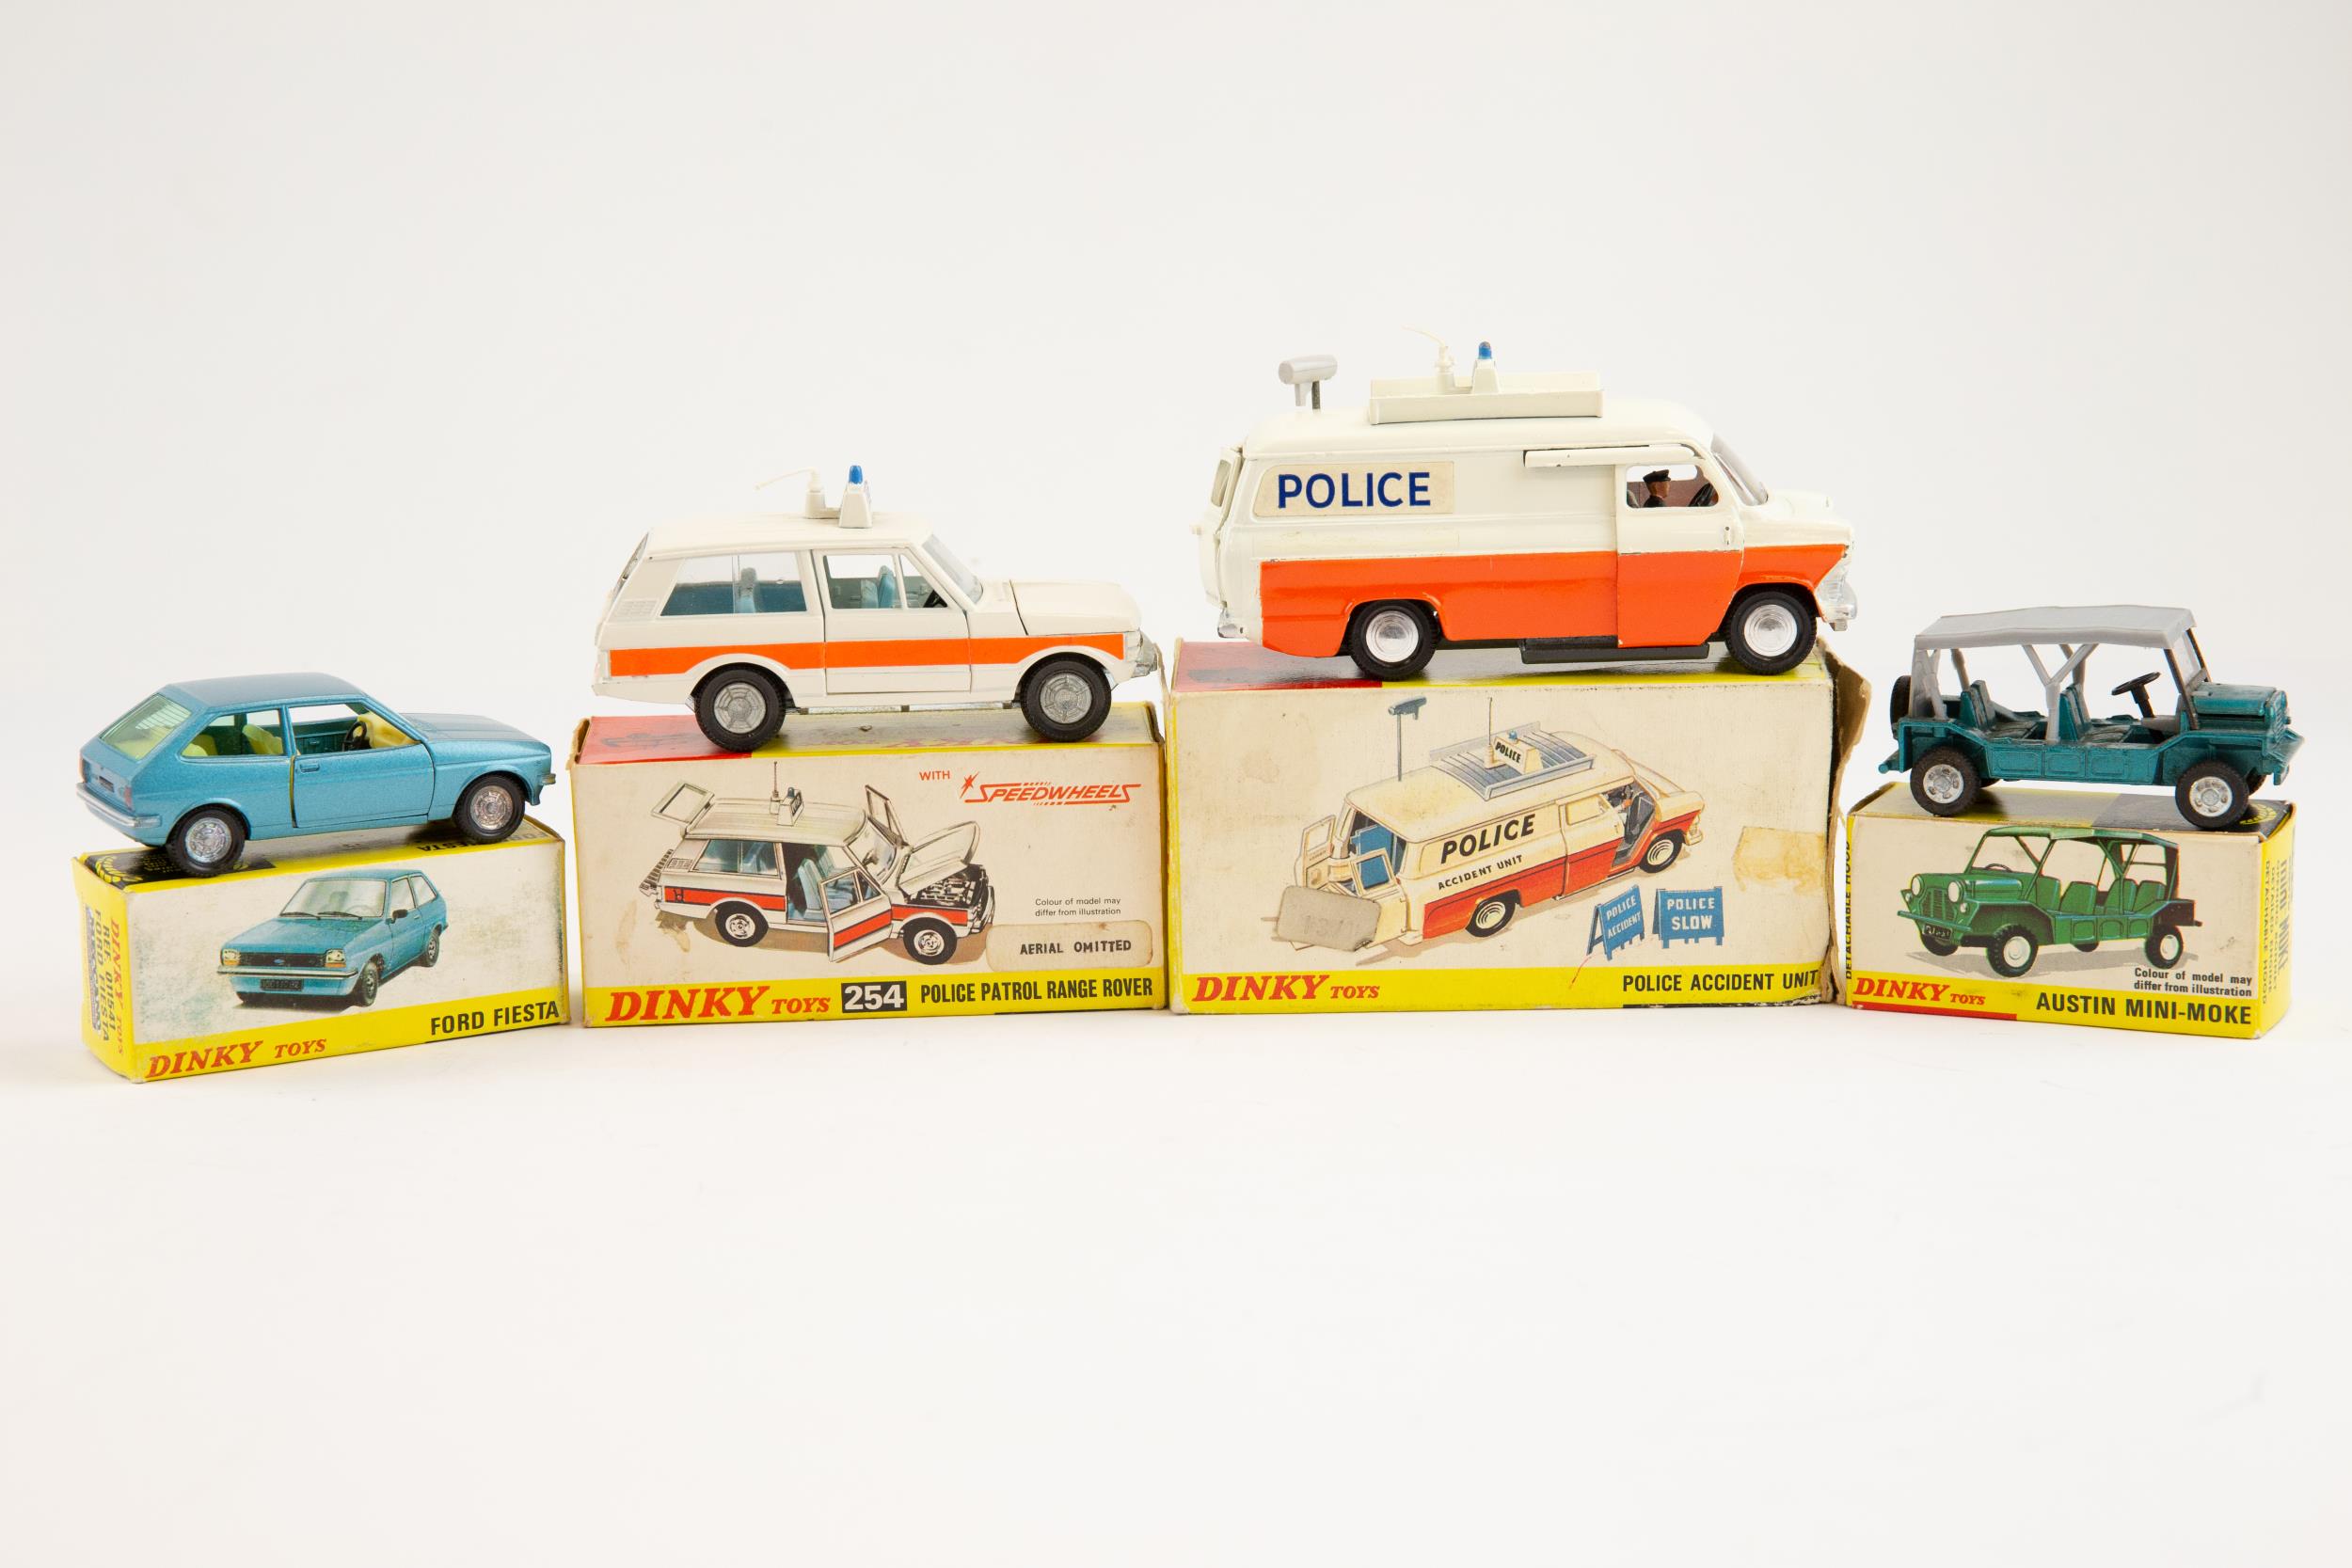 4 Dinky Toys. POLICE Patrol Range Rover (254). In white with paper orange flashes, light blue - Image 2 of 2